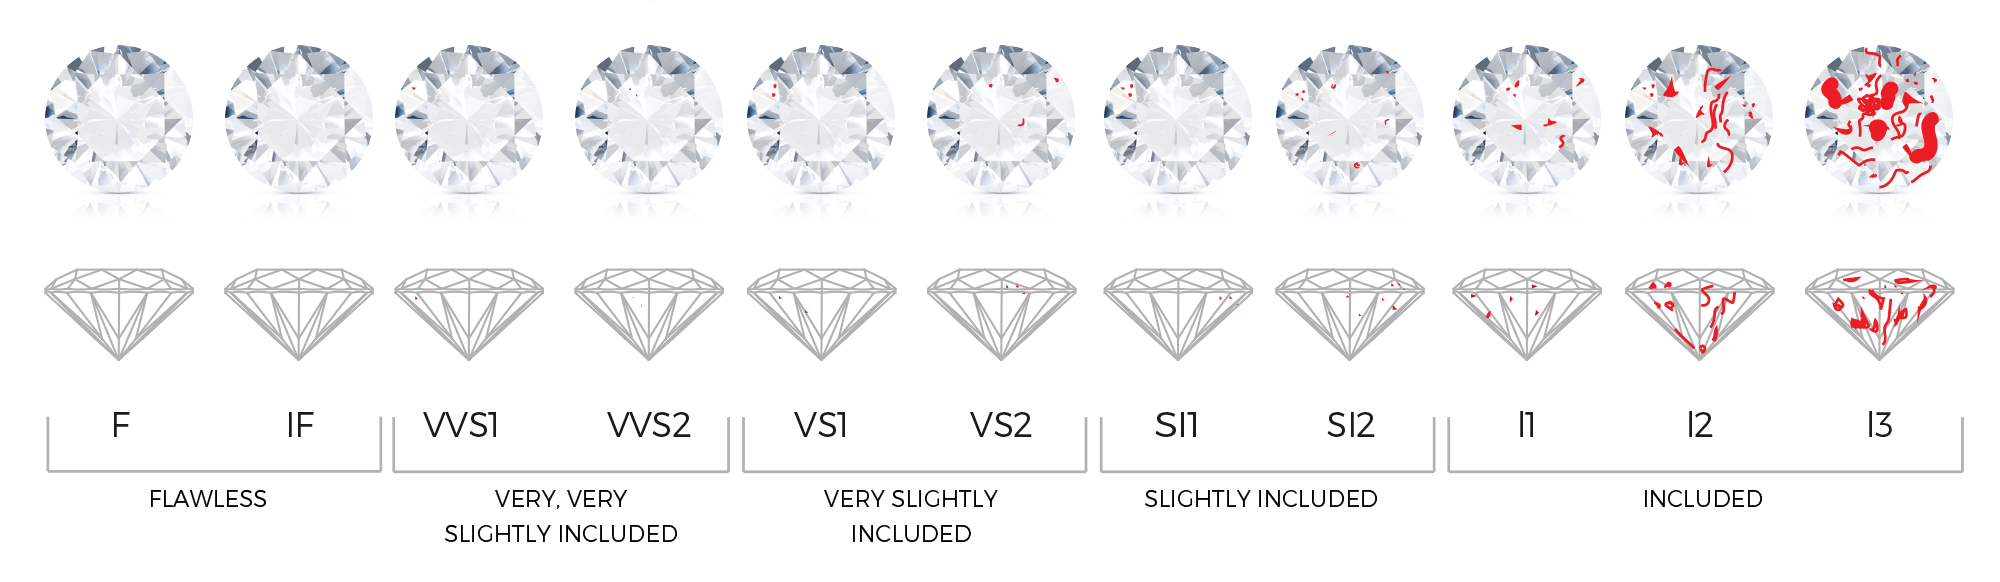 Image with information about the clarity of a diamond